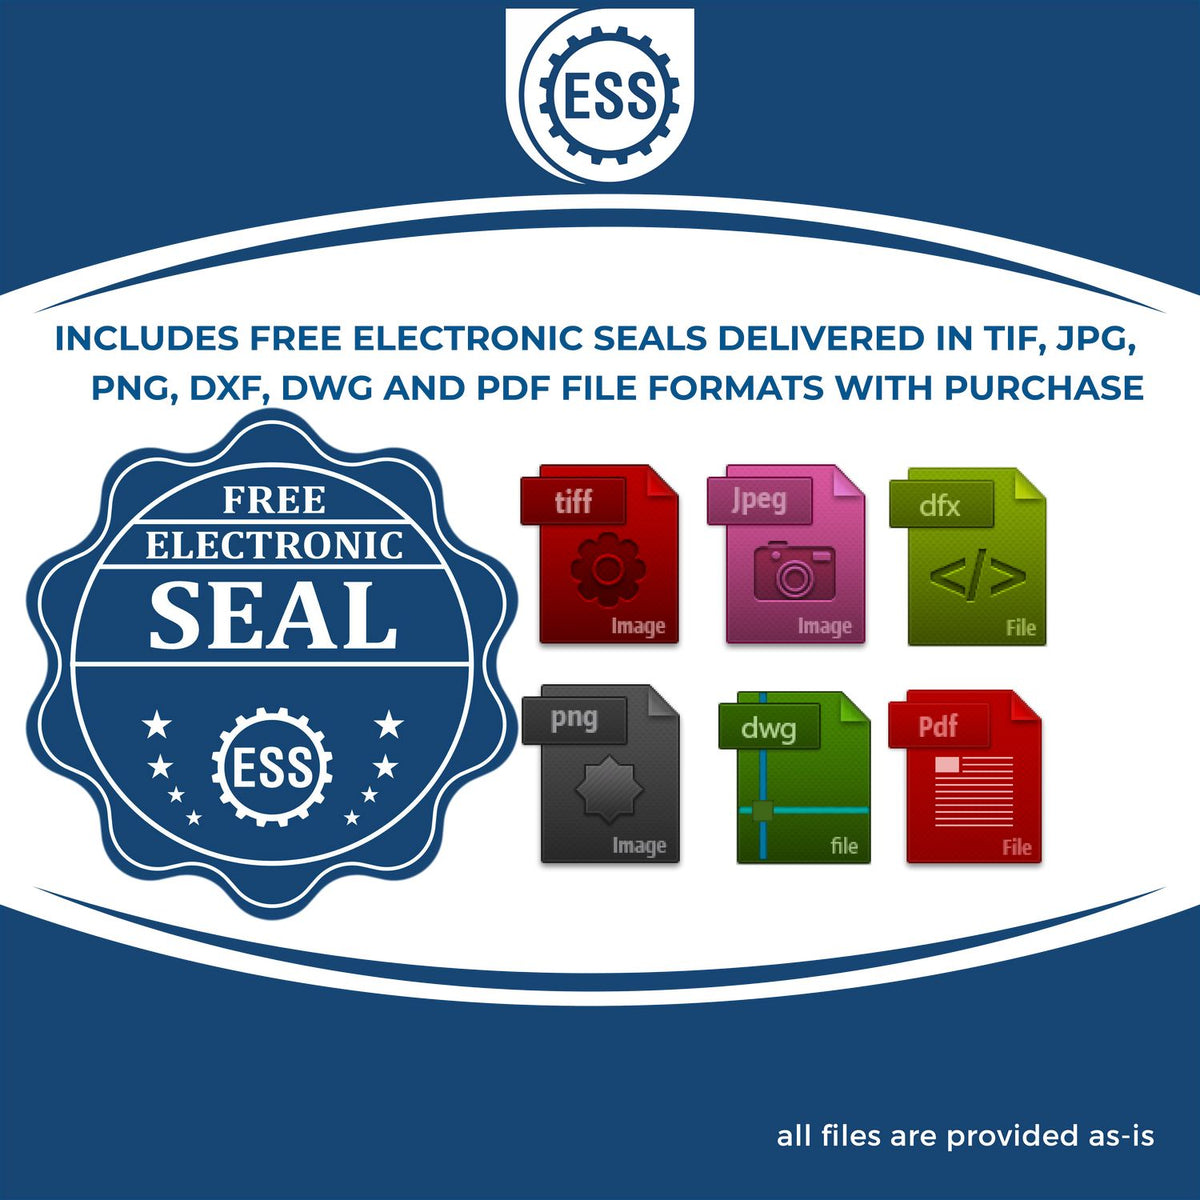 An infographic for the free electronic seal for the Gift Texas Architect Seal illustrating the different file type icons such as DXF, DWG, TIF, JPG and PNG.